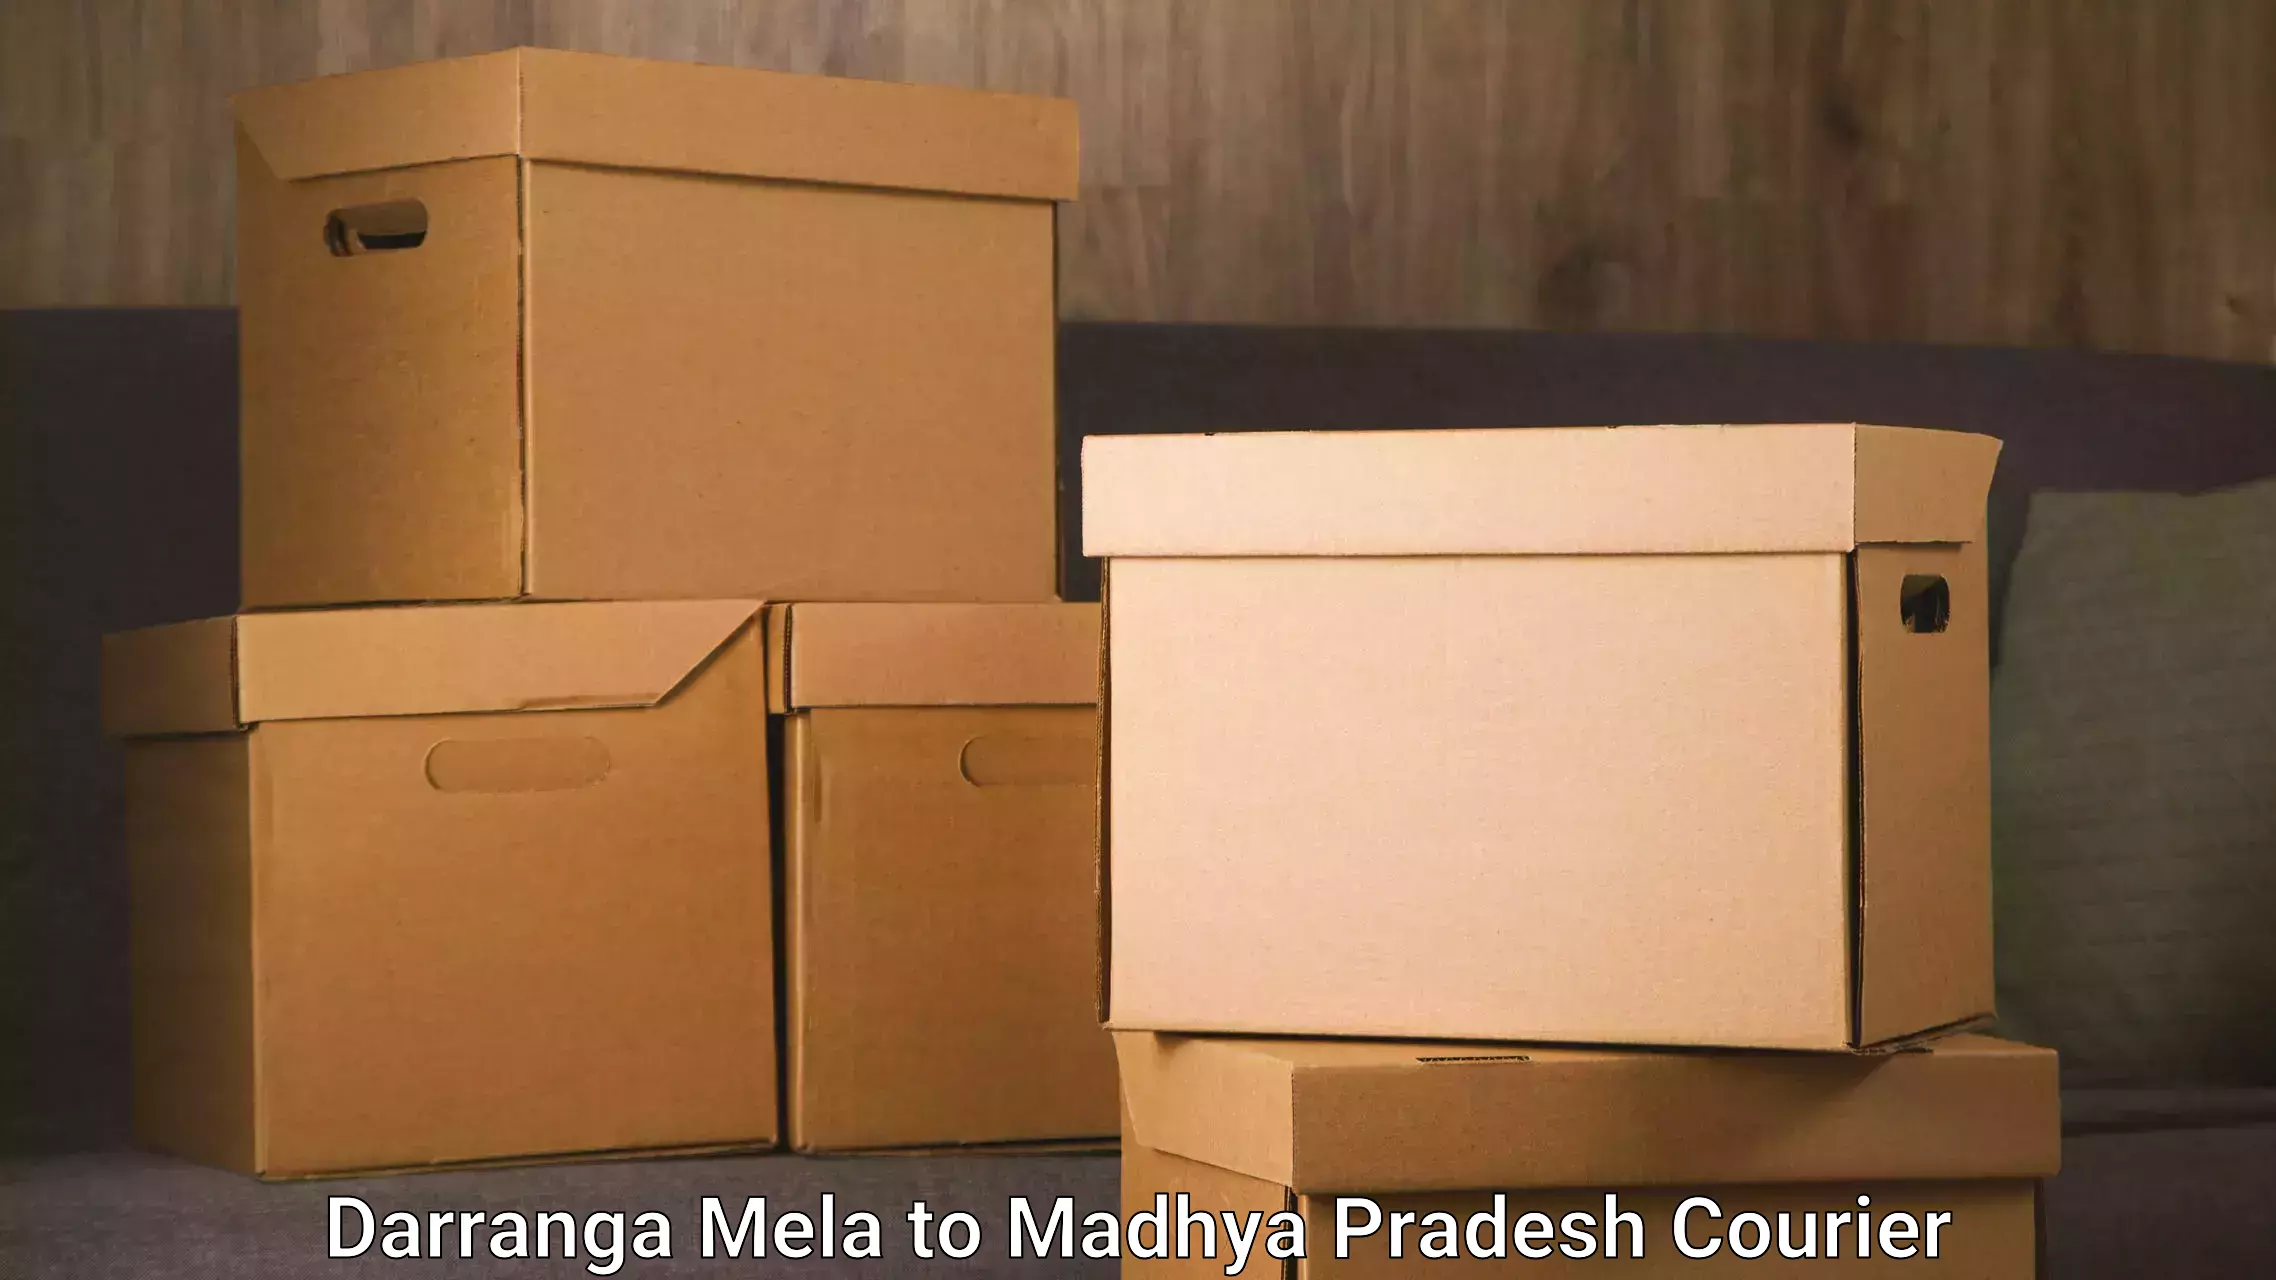 Reliable shipping solutions in Darranga Mela to Gwalior